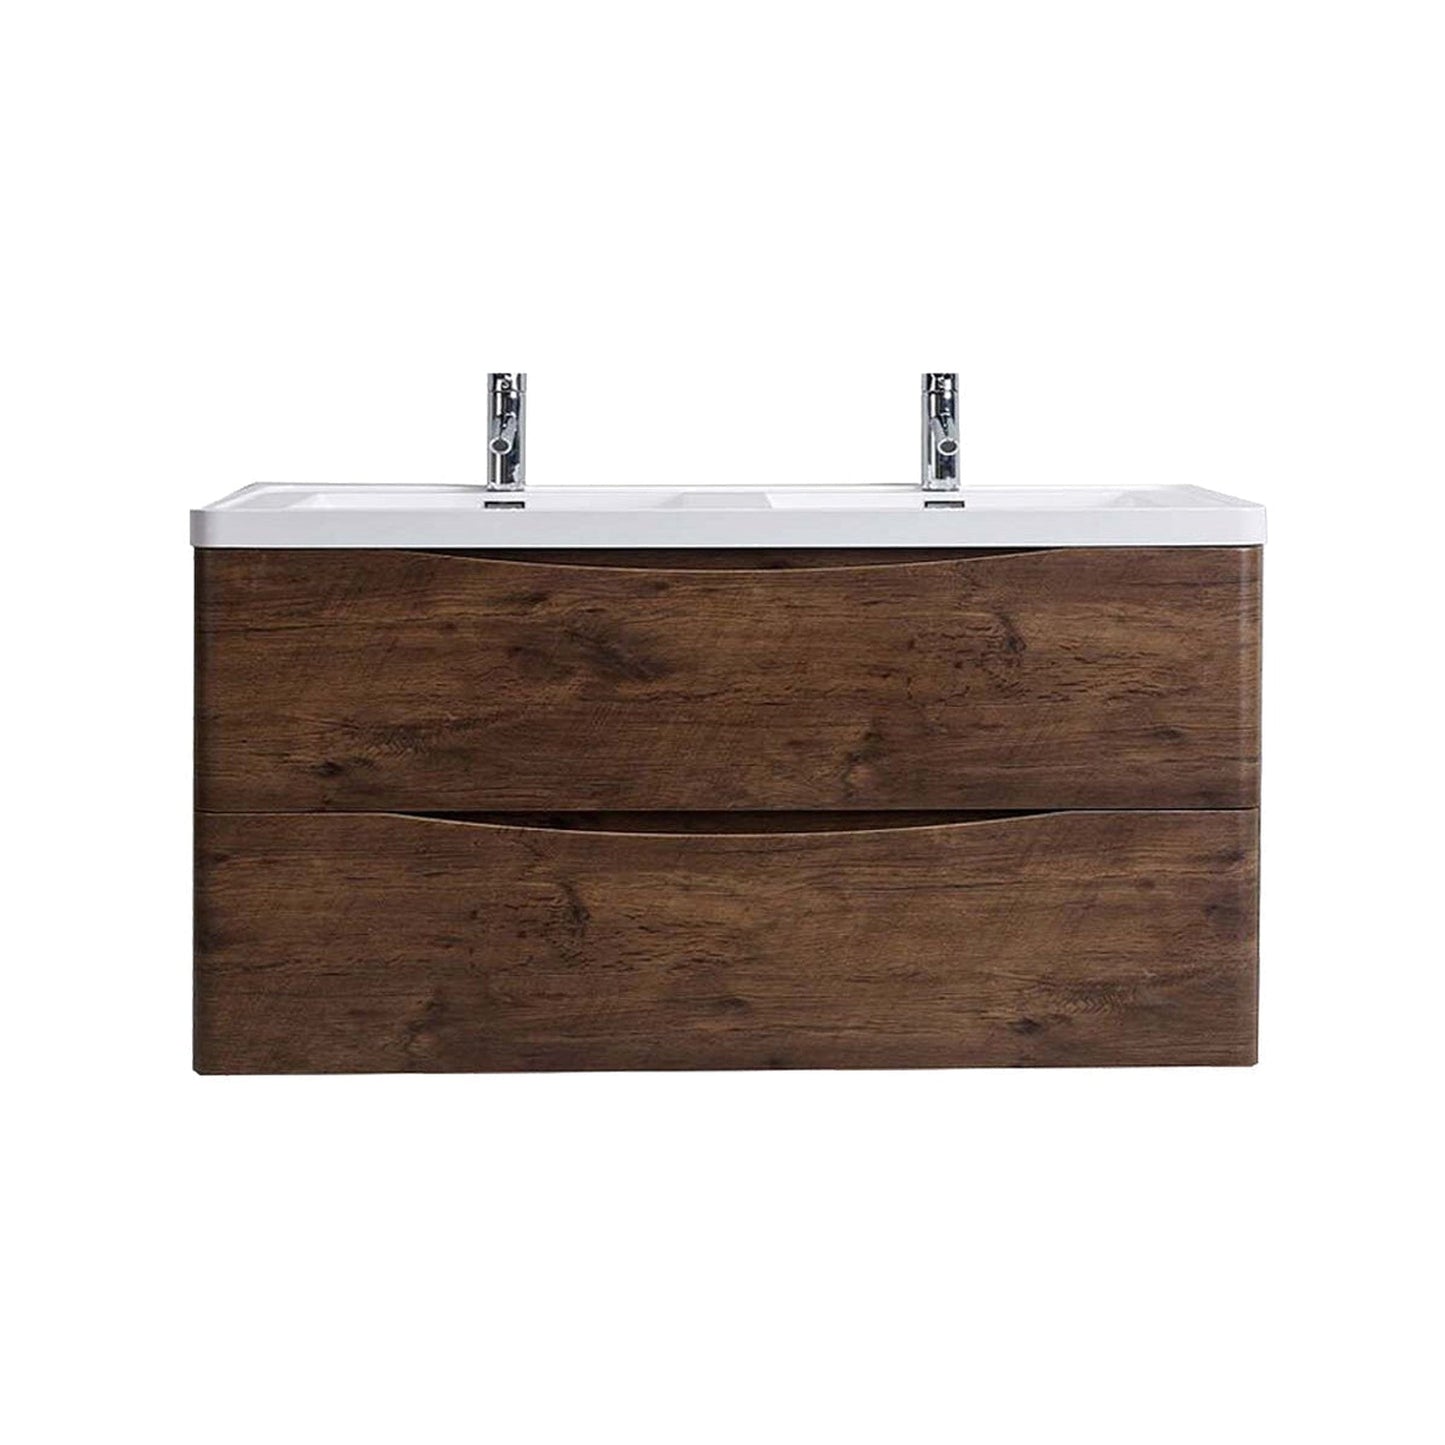 Eviva Smile 48" x 19" Rosewood Wall-Mounted Bathroom Vanity With White Double Integrated Sink